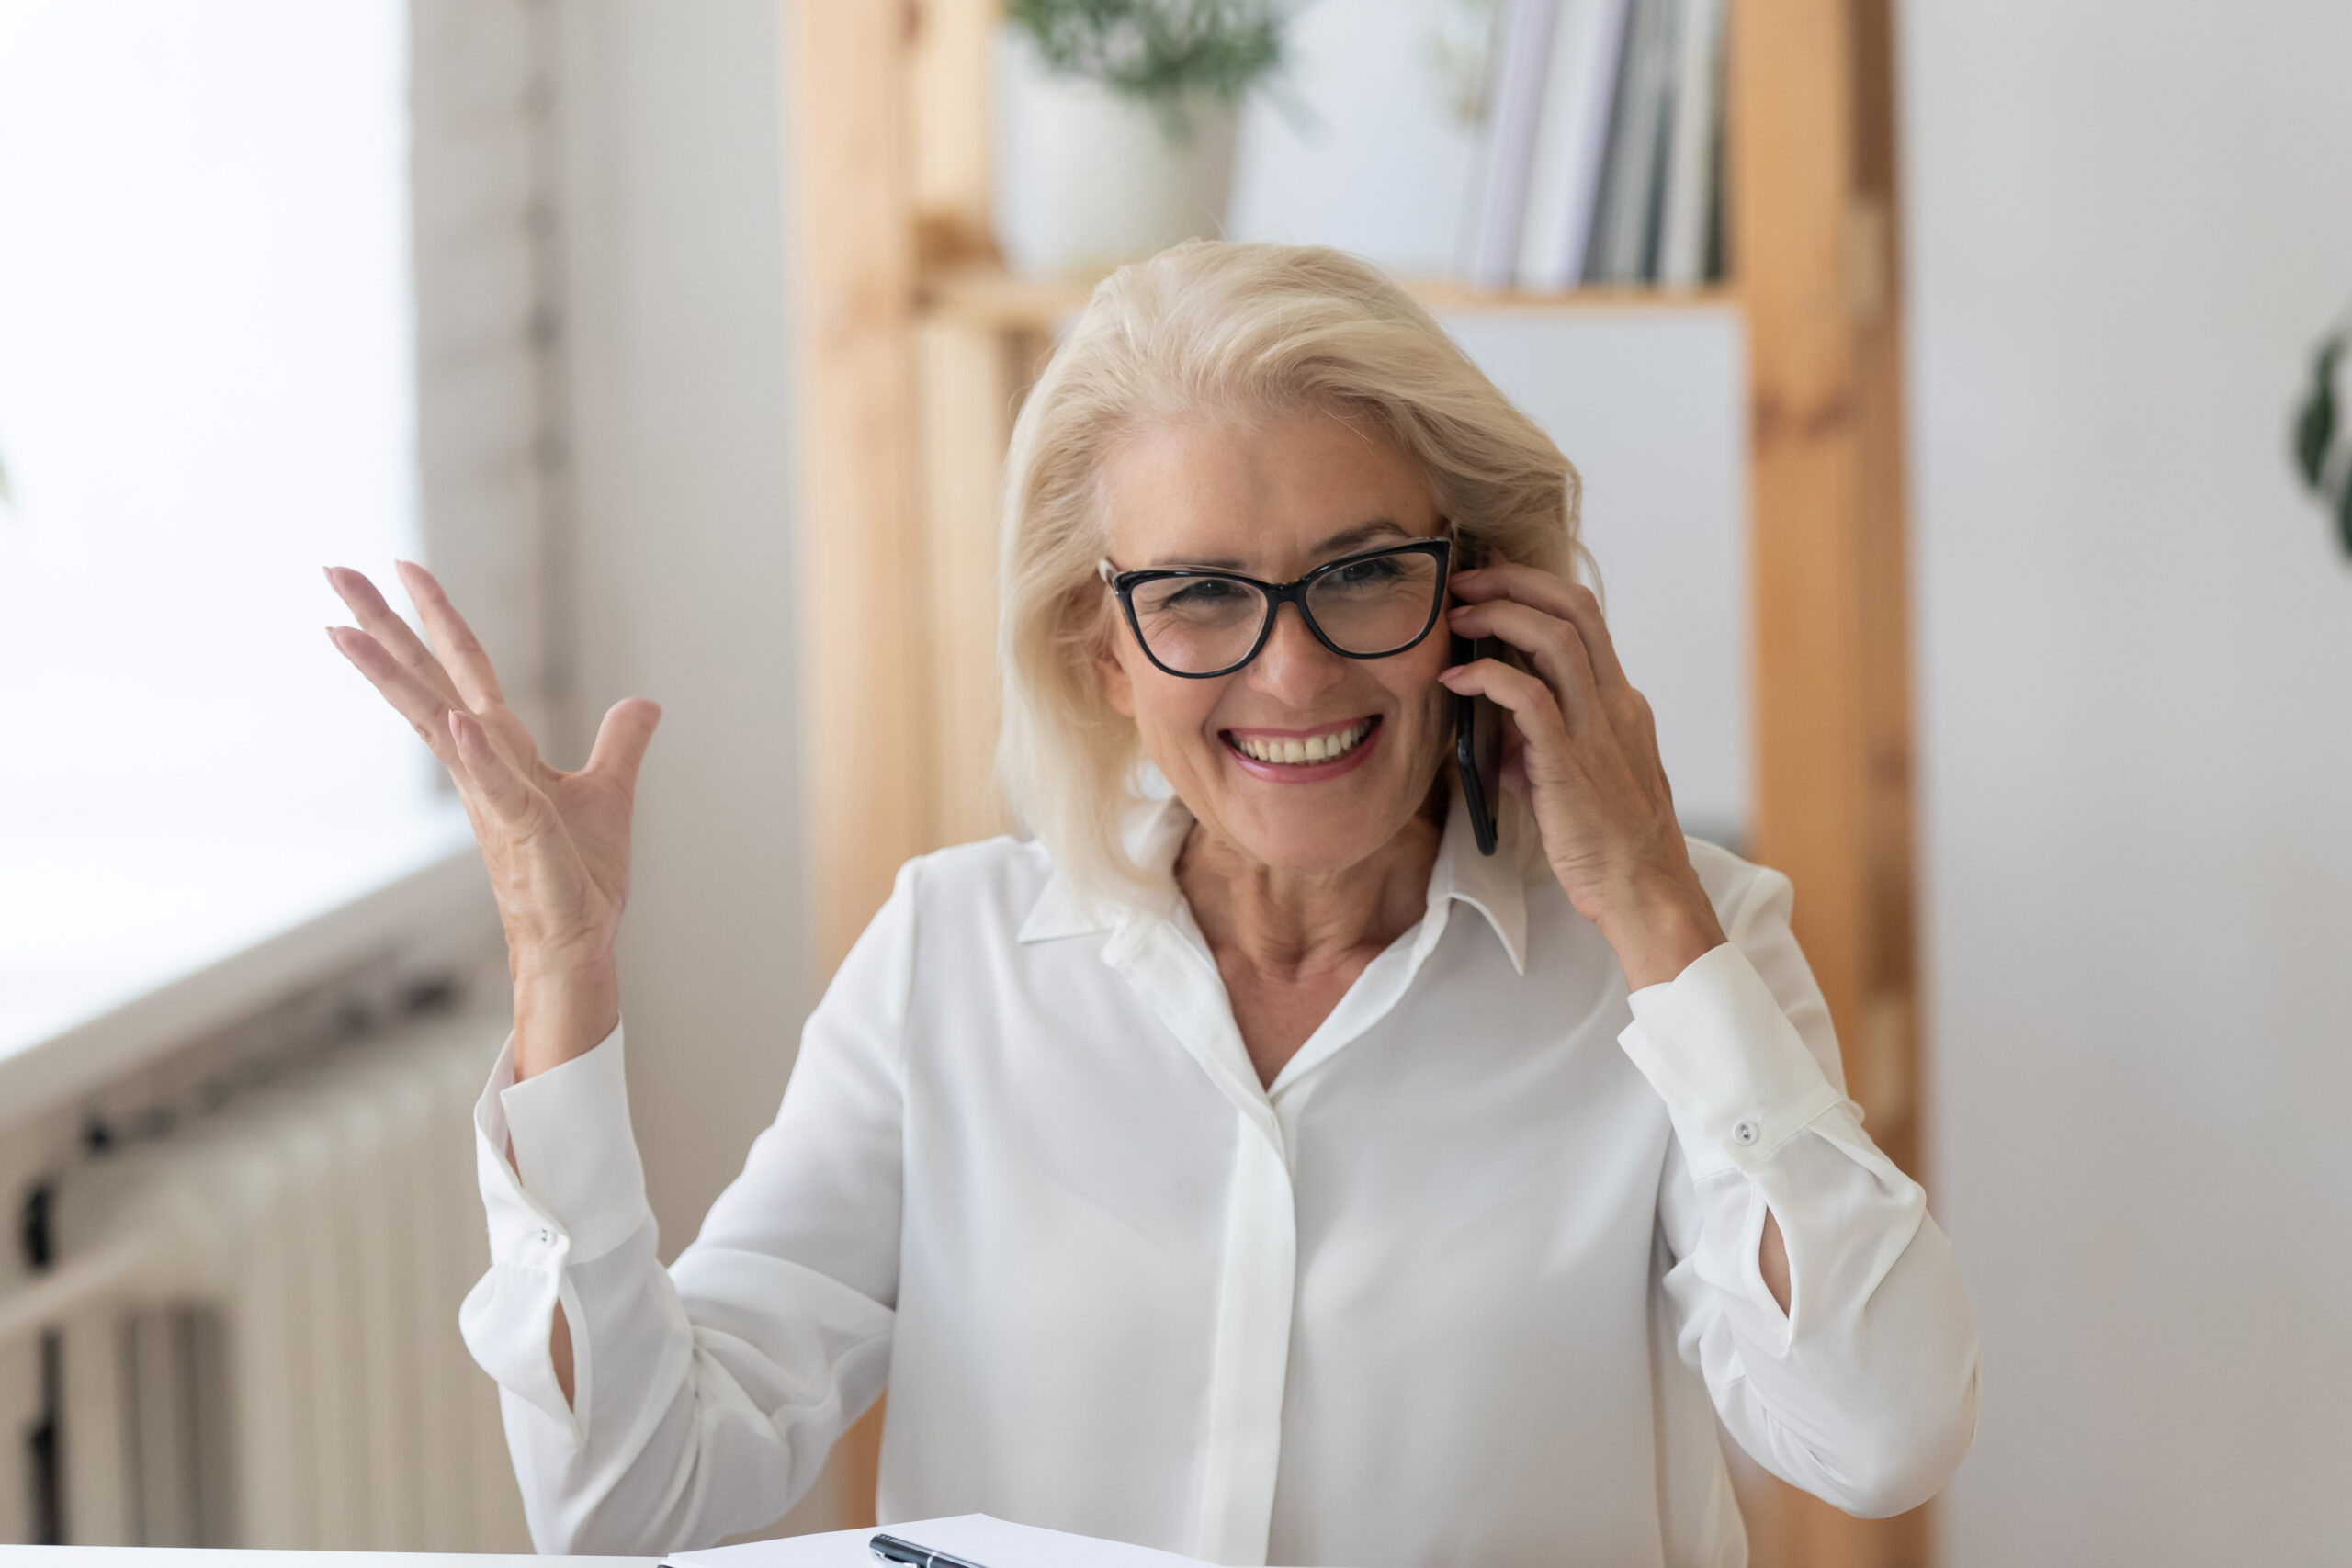 An older woman answers a personalized call from an association's membership drive designed to increase memberships.